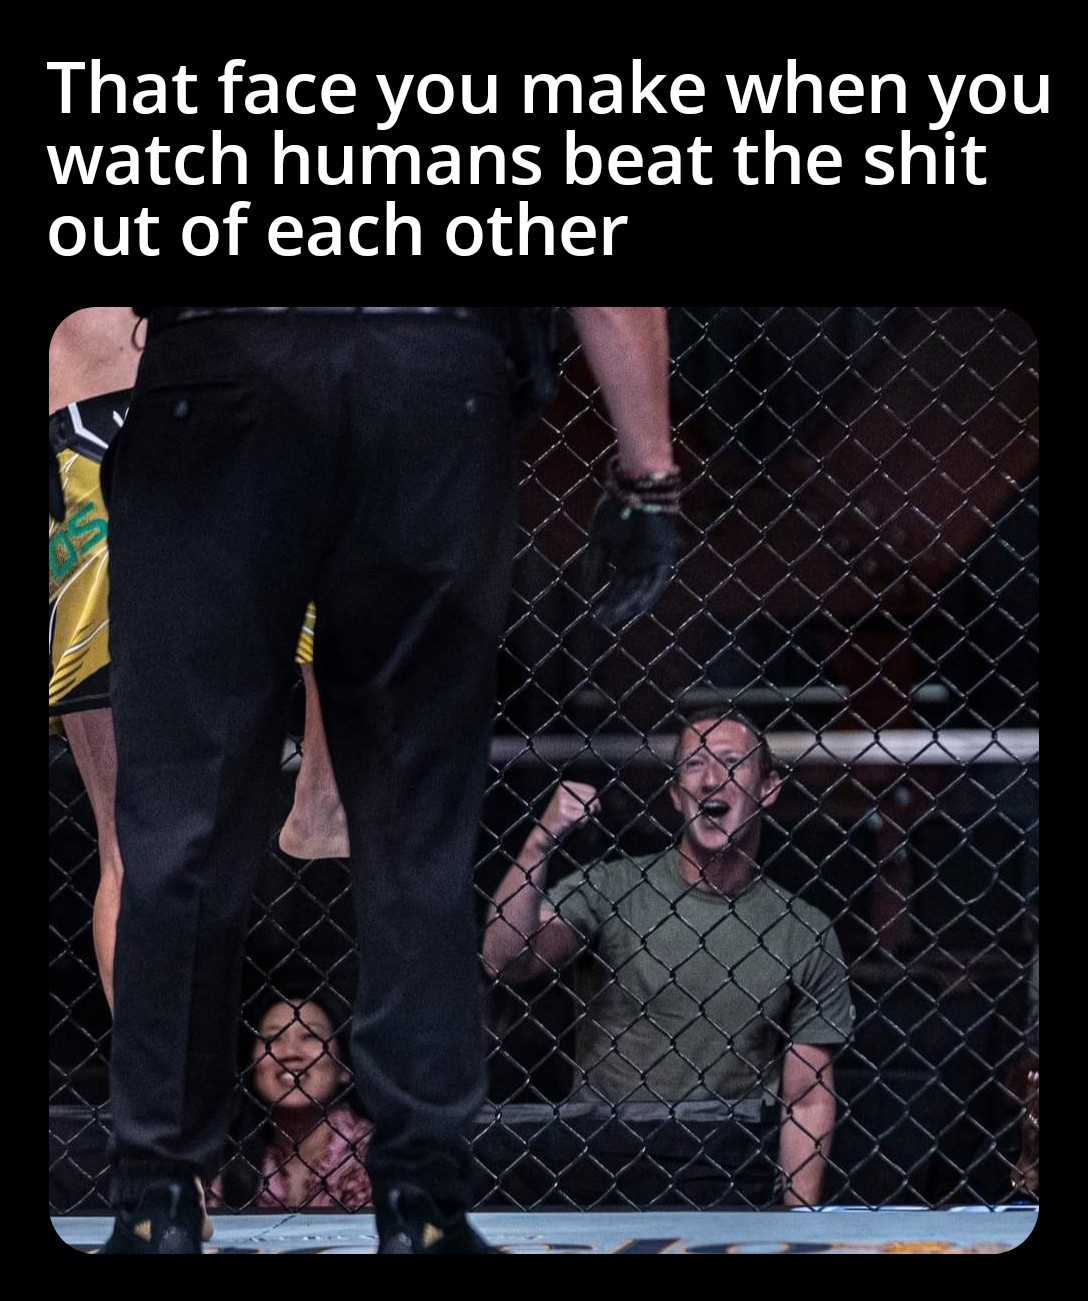 monday morning randomness - Mark Zuckerberg - That face you make when you watch humans beat the shit out of each other